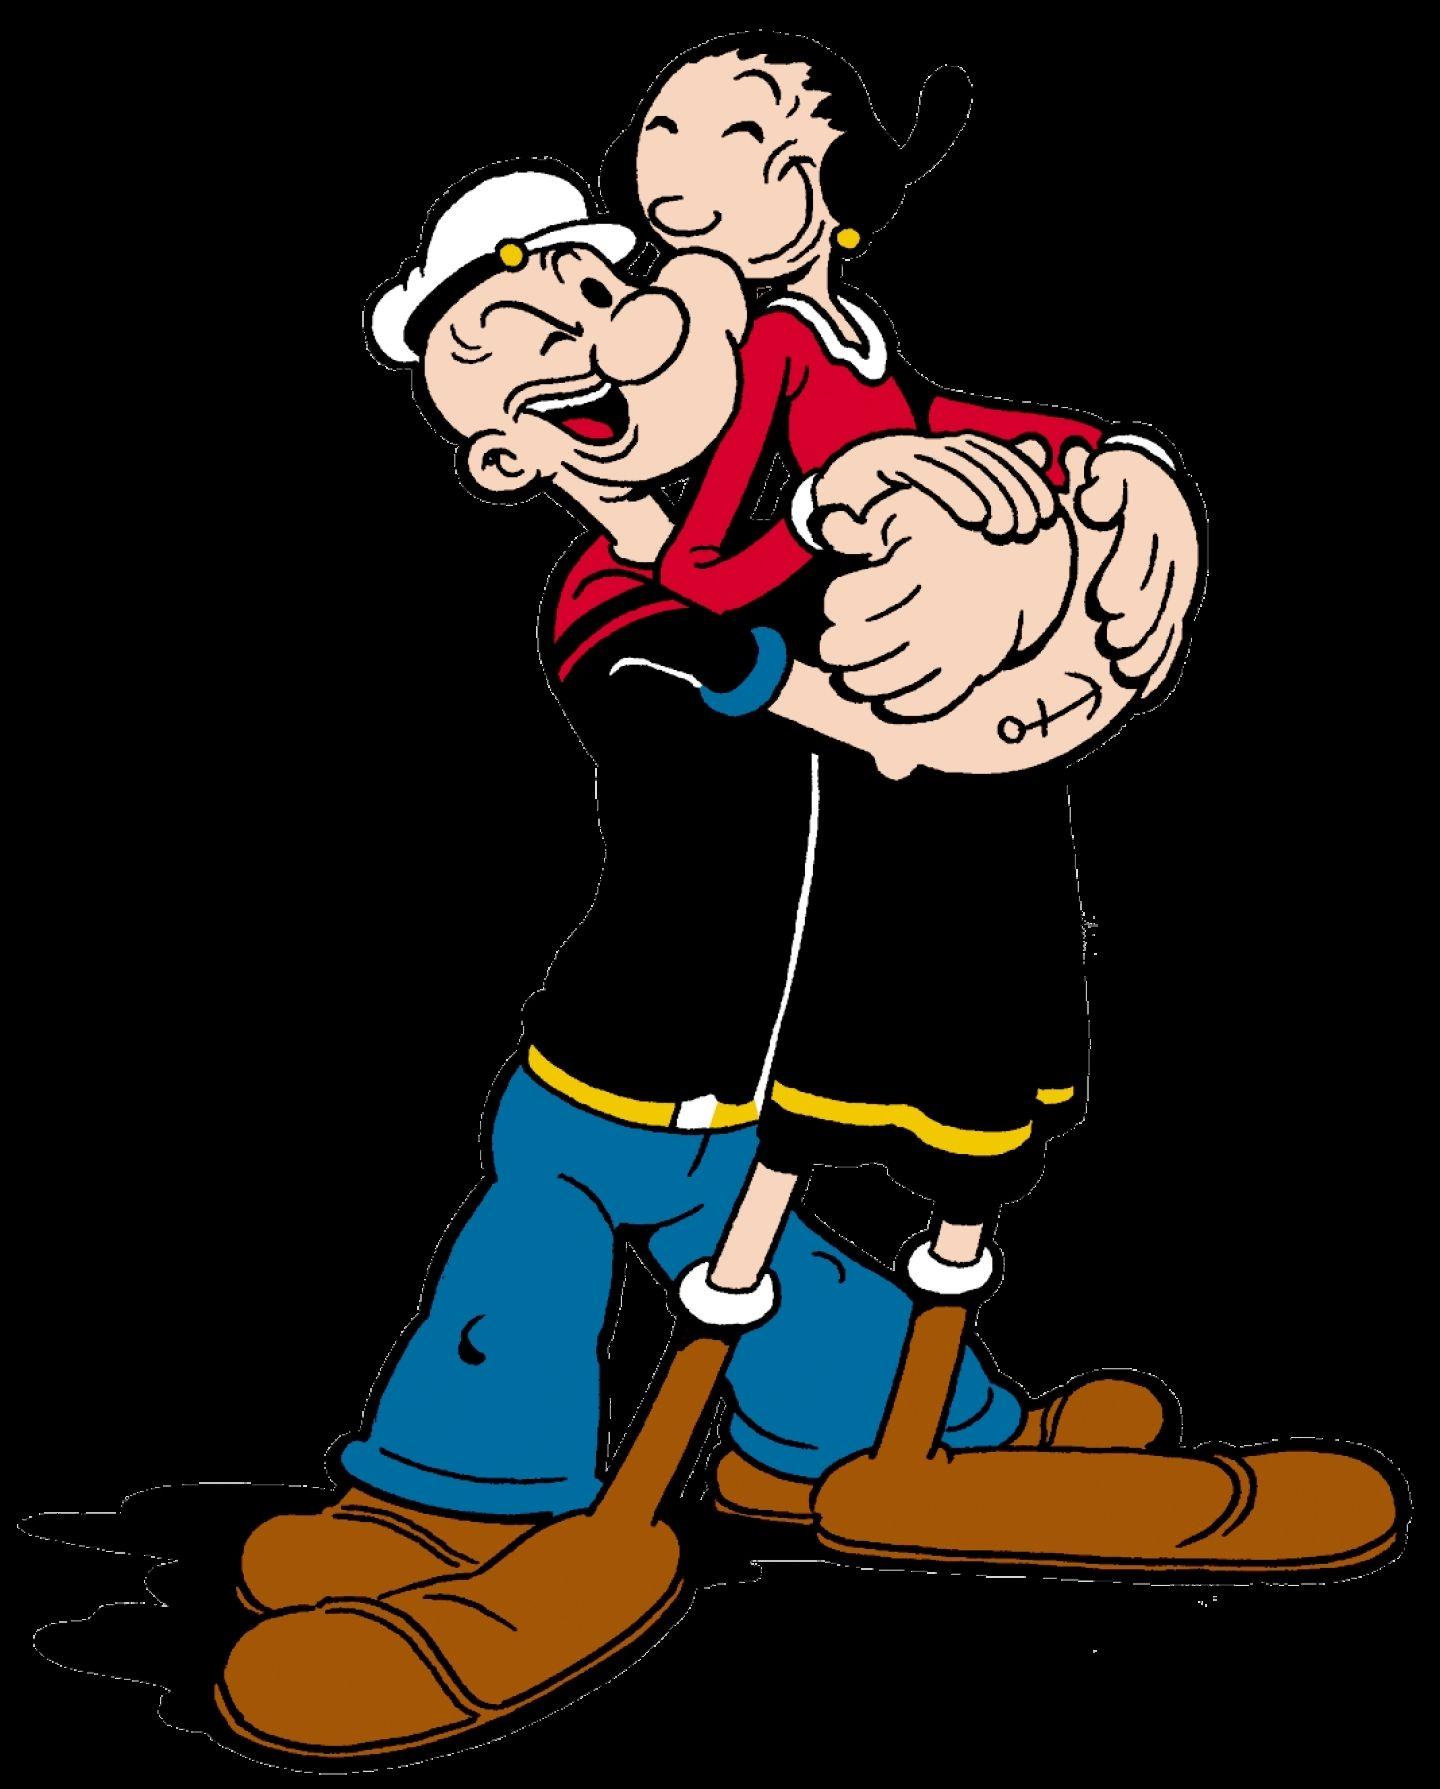 Wallpapers Popeye 2K Cartoon With Download Pf Wallpaper For PC Olive